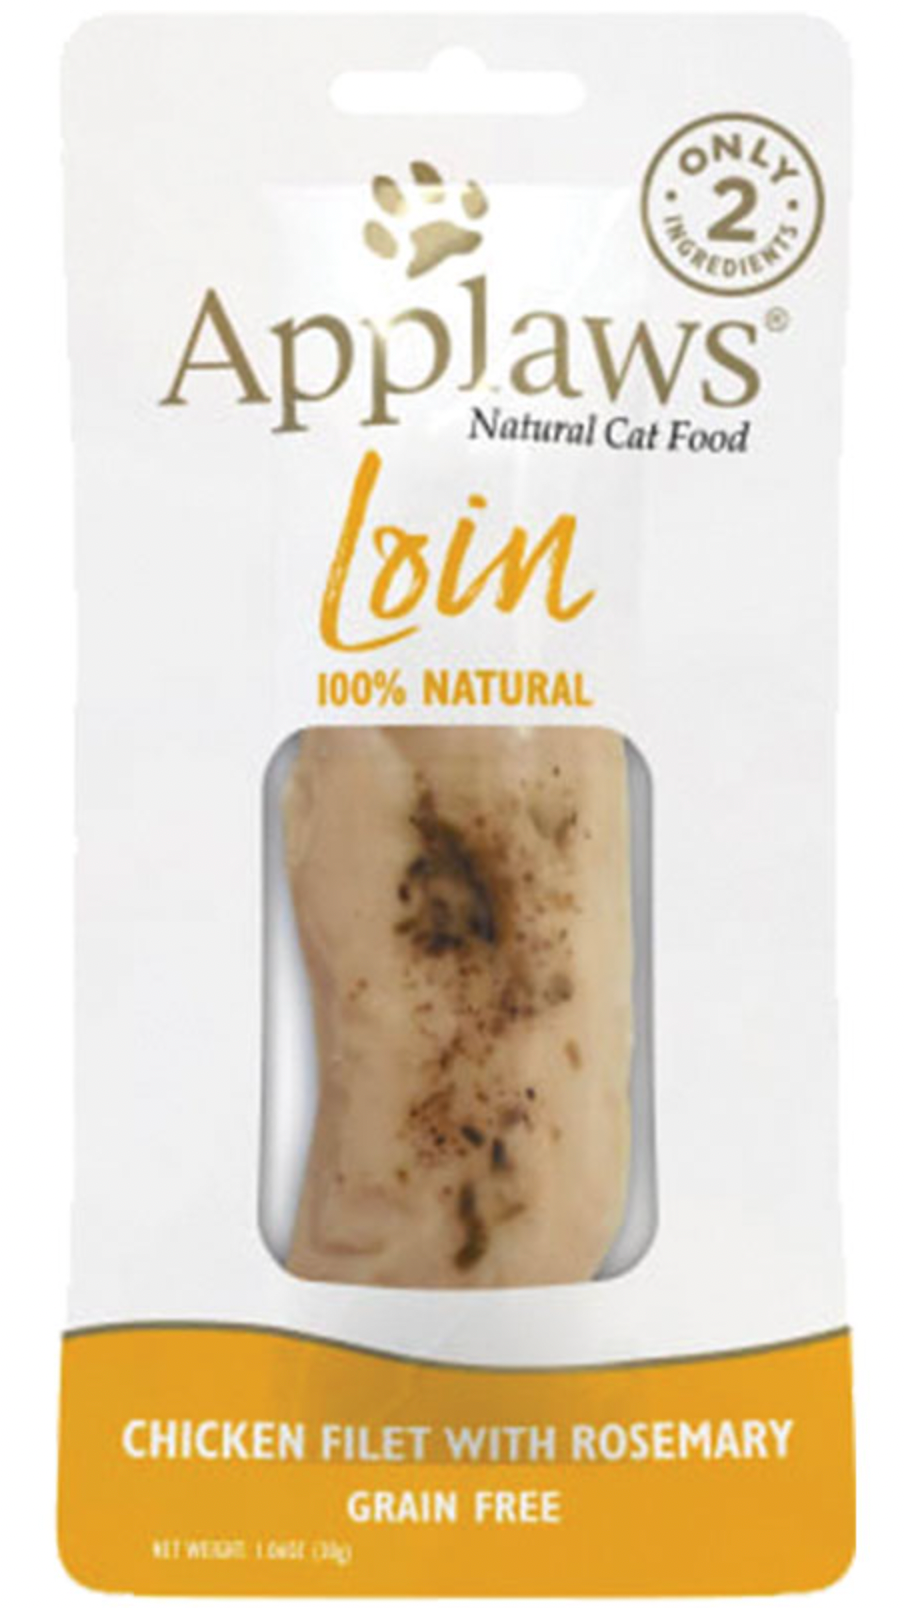 Applaws 100% Natural Chicken Filet with Rosemary, 1.06 oz.